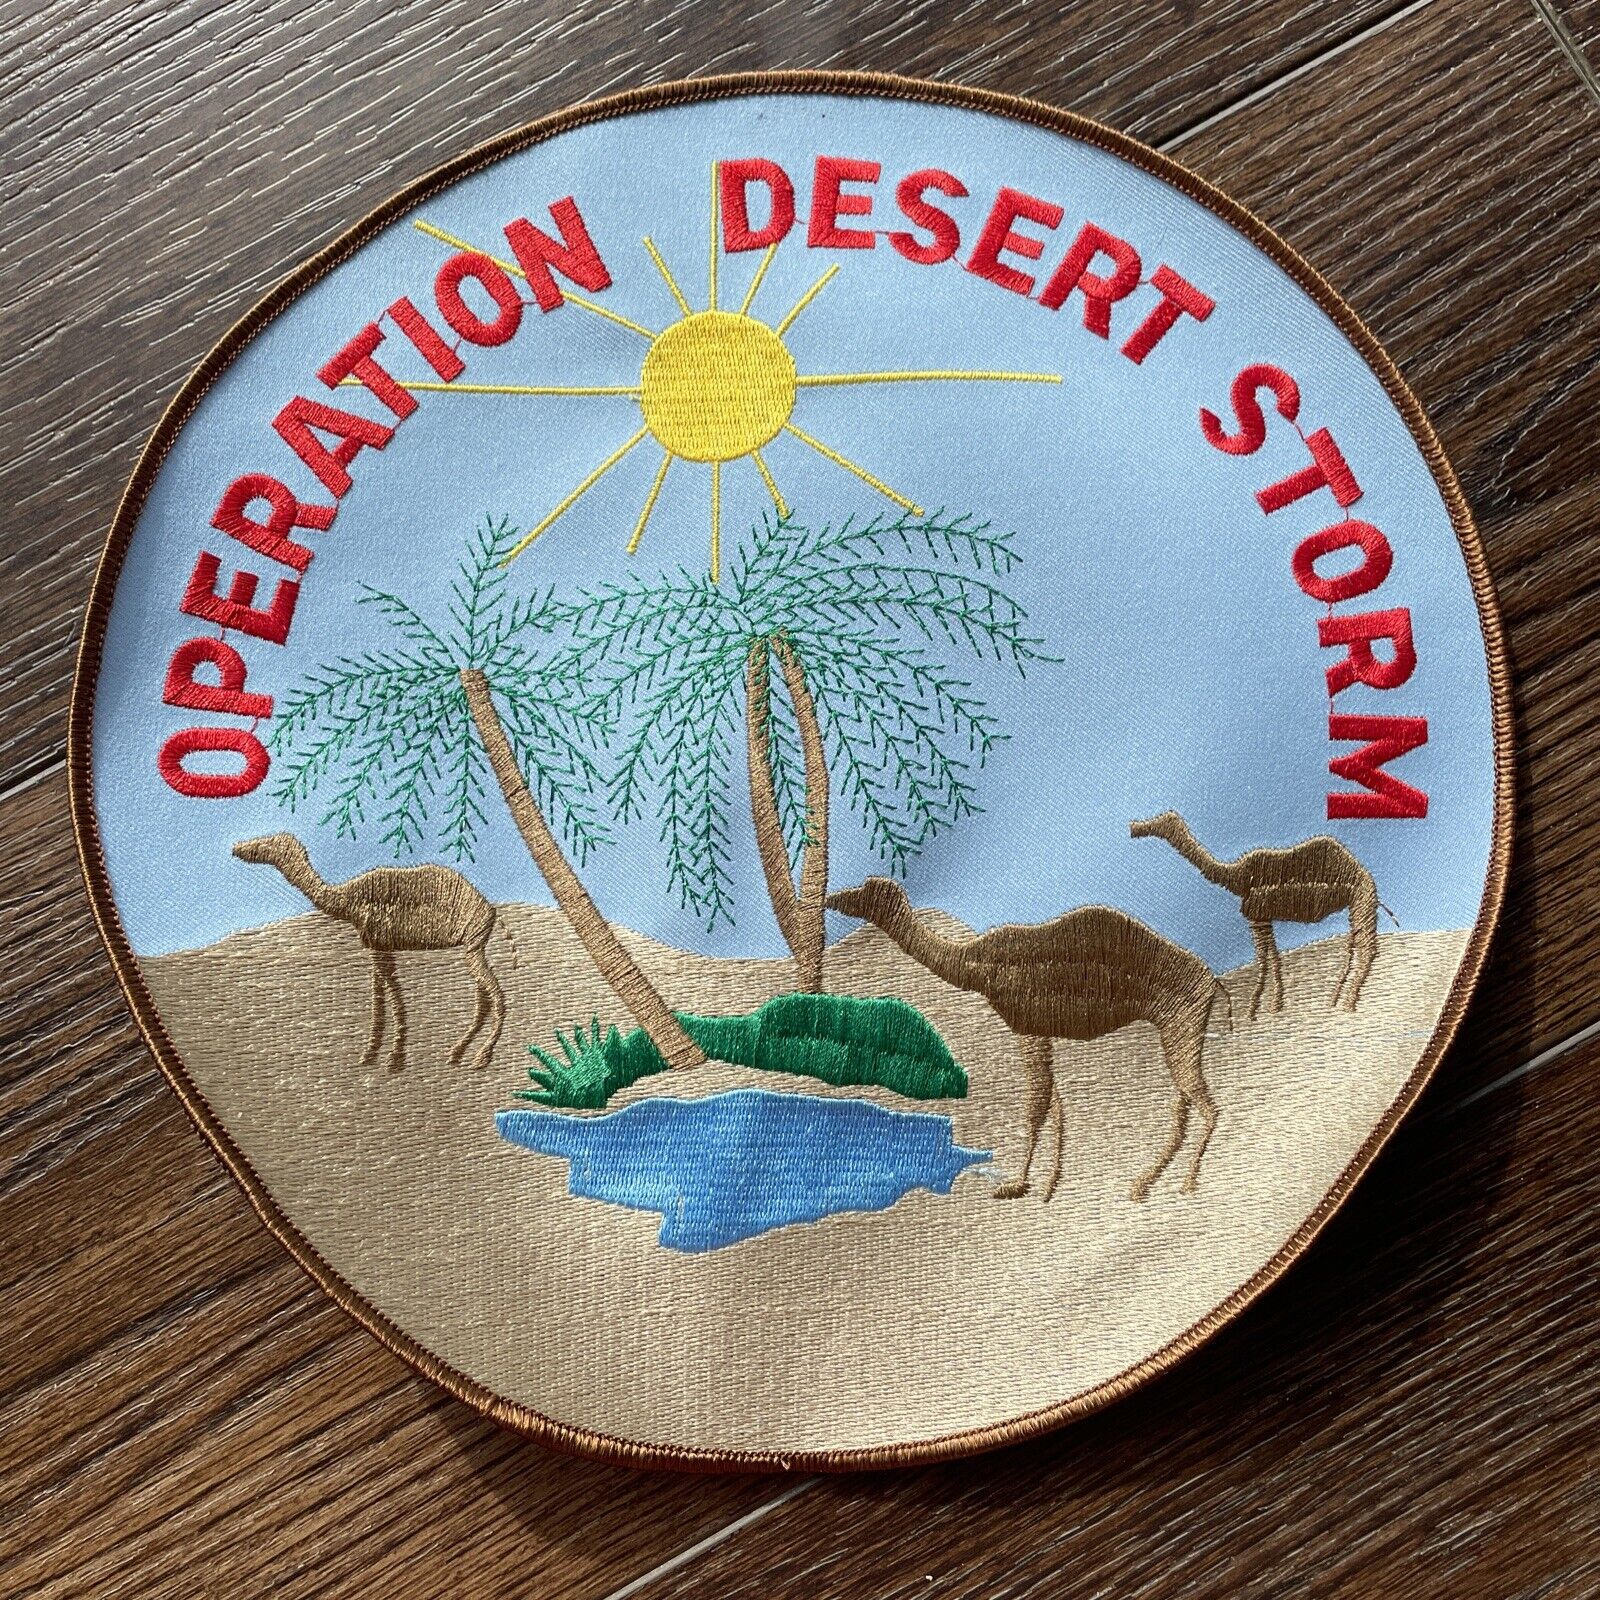 10” Operation Desert Storm Military Patch; US army navy USMC; camels oasis